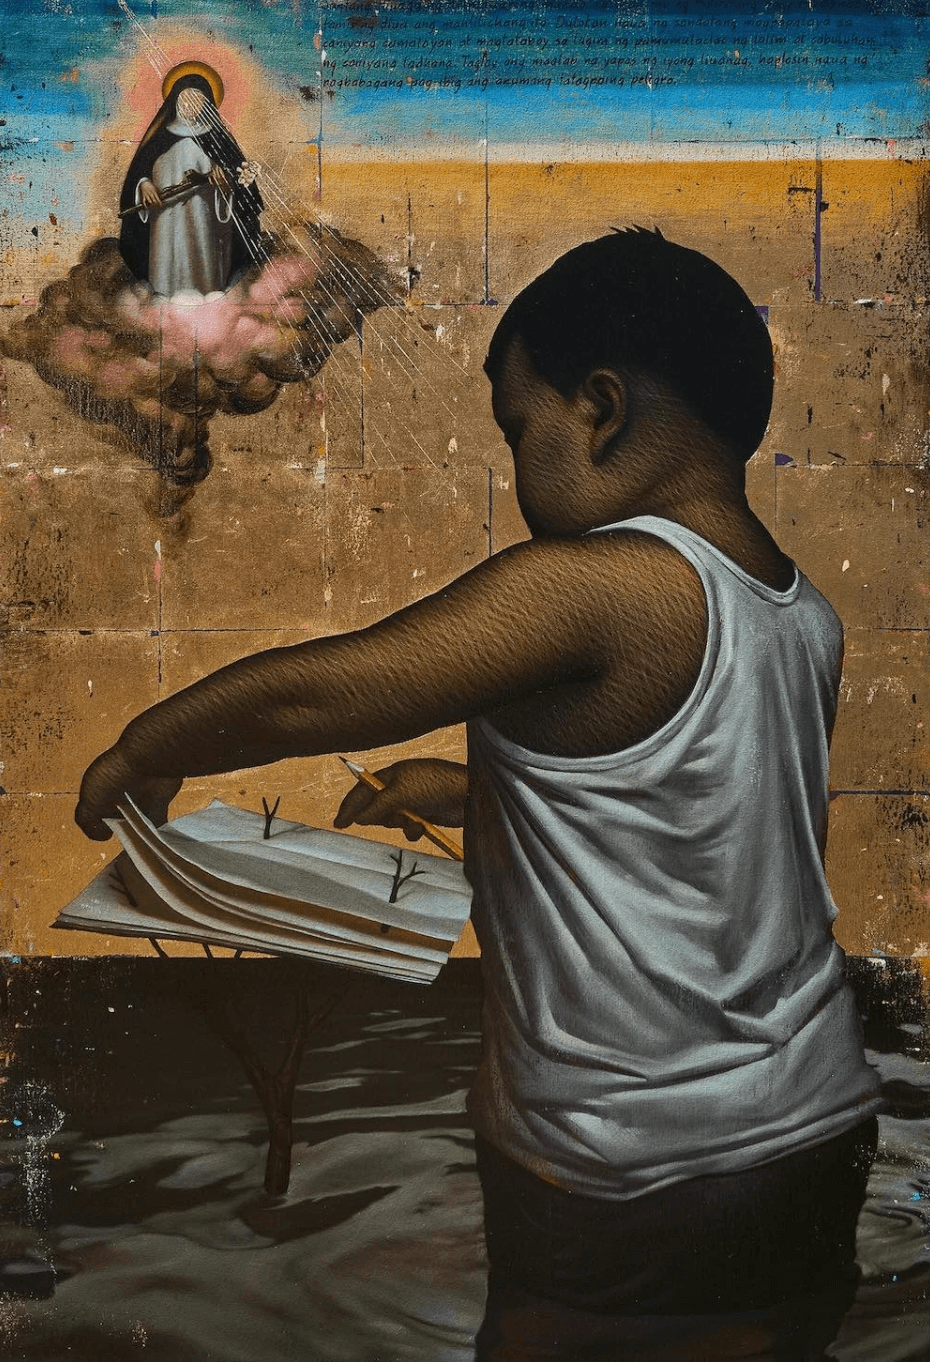 Ocula describes Leslie de Chavez as a Manila-born Filipino artist who delicately addresses sensitive topics such as imperialism, colonial history, and religion in his country. 